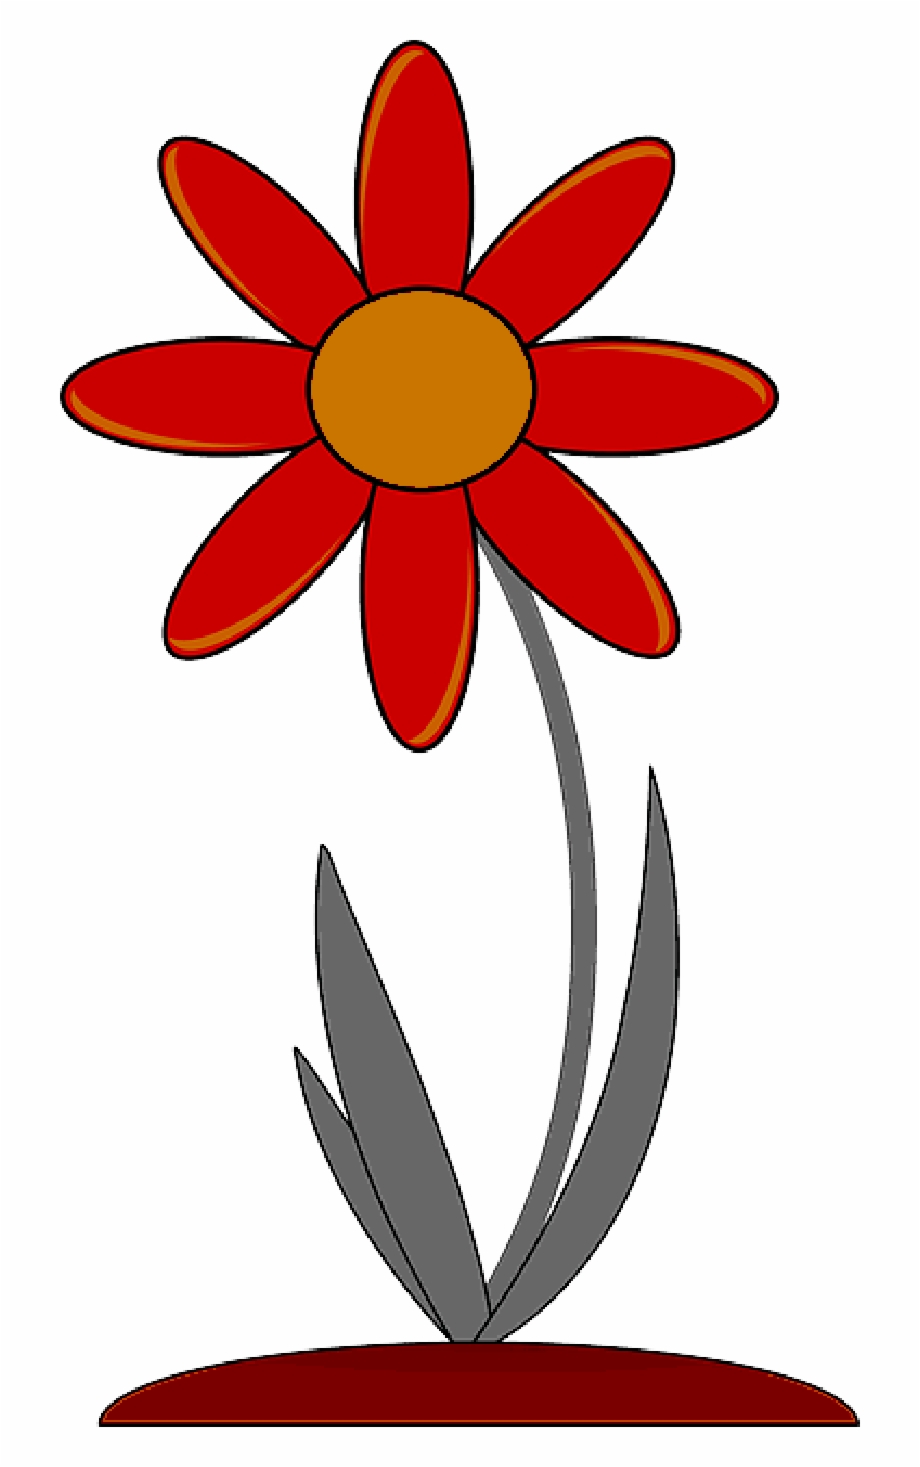 Red, Outline, Drawing, Plants, Flower, Flowers, Cartoon